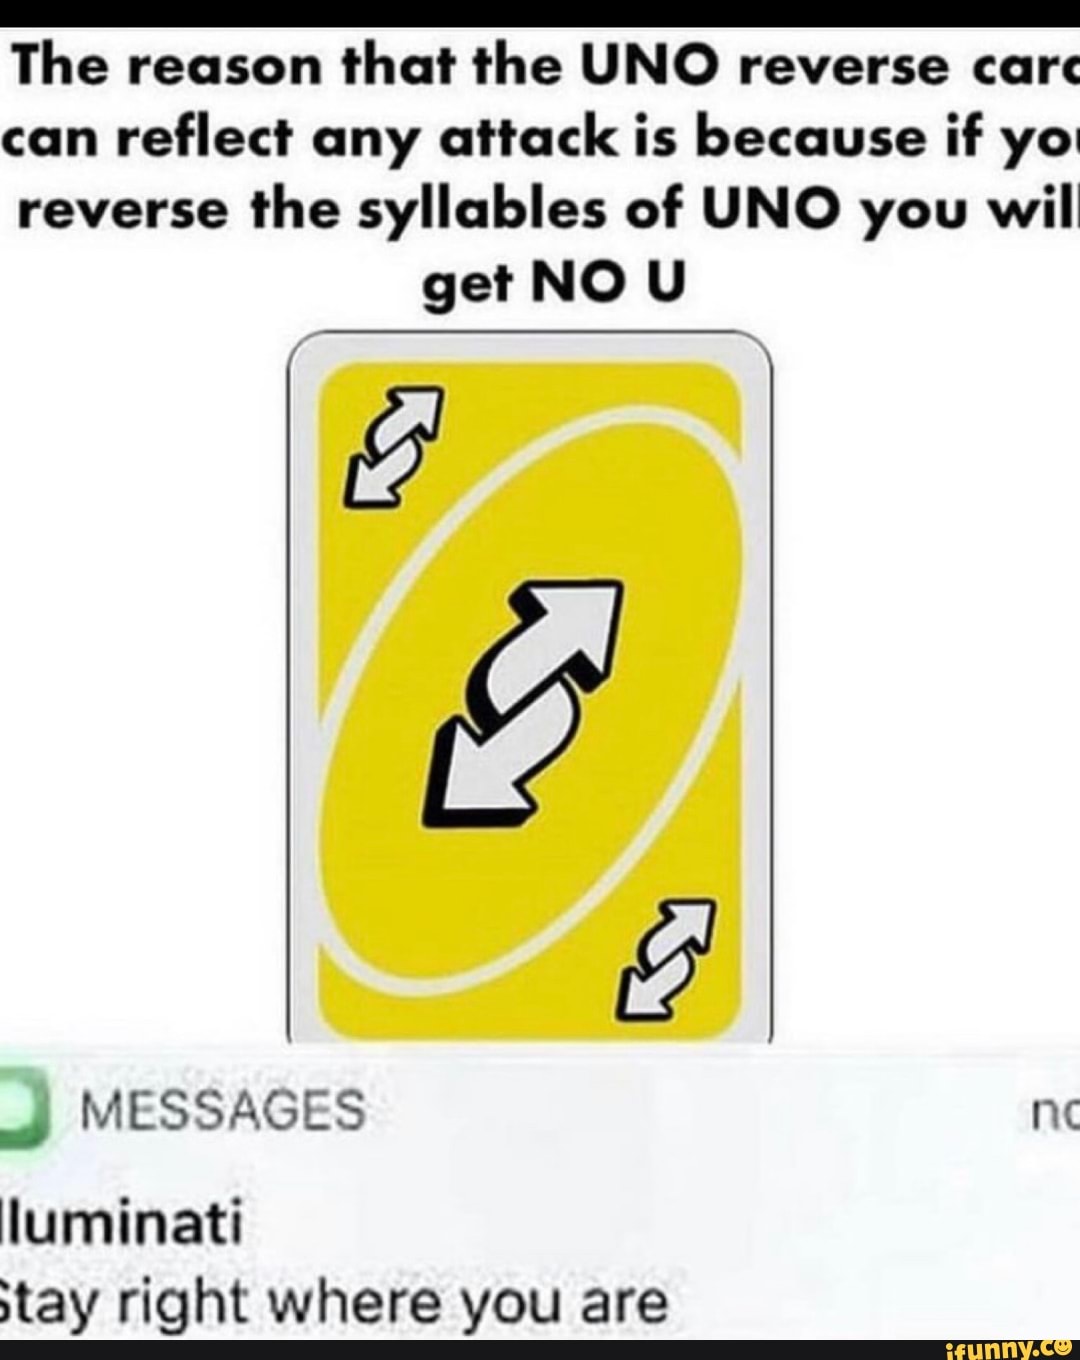 The reason that the UNO Reverse Card can reﬂect any attack is because if  you reverse the syllables of UNO, you will get - iFunny Brazil